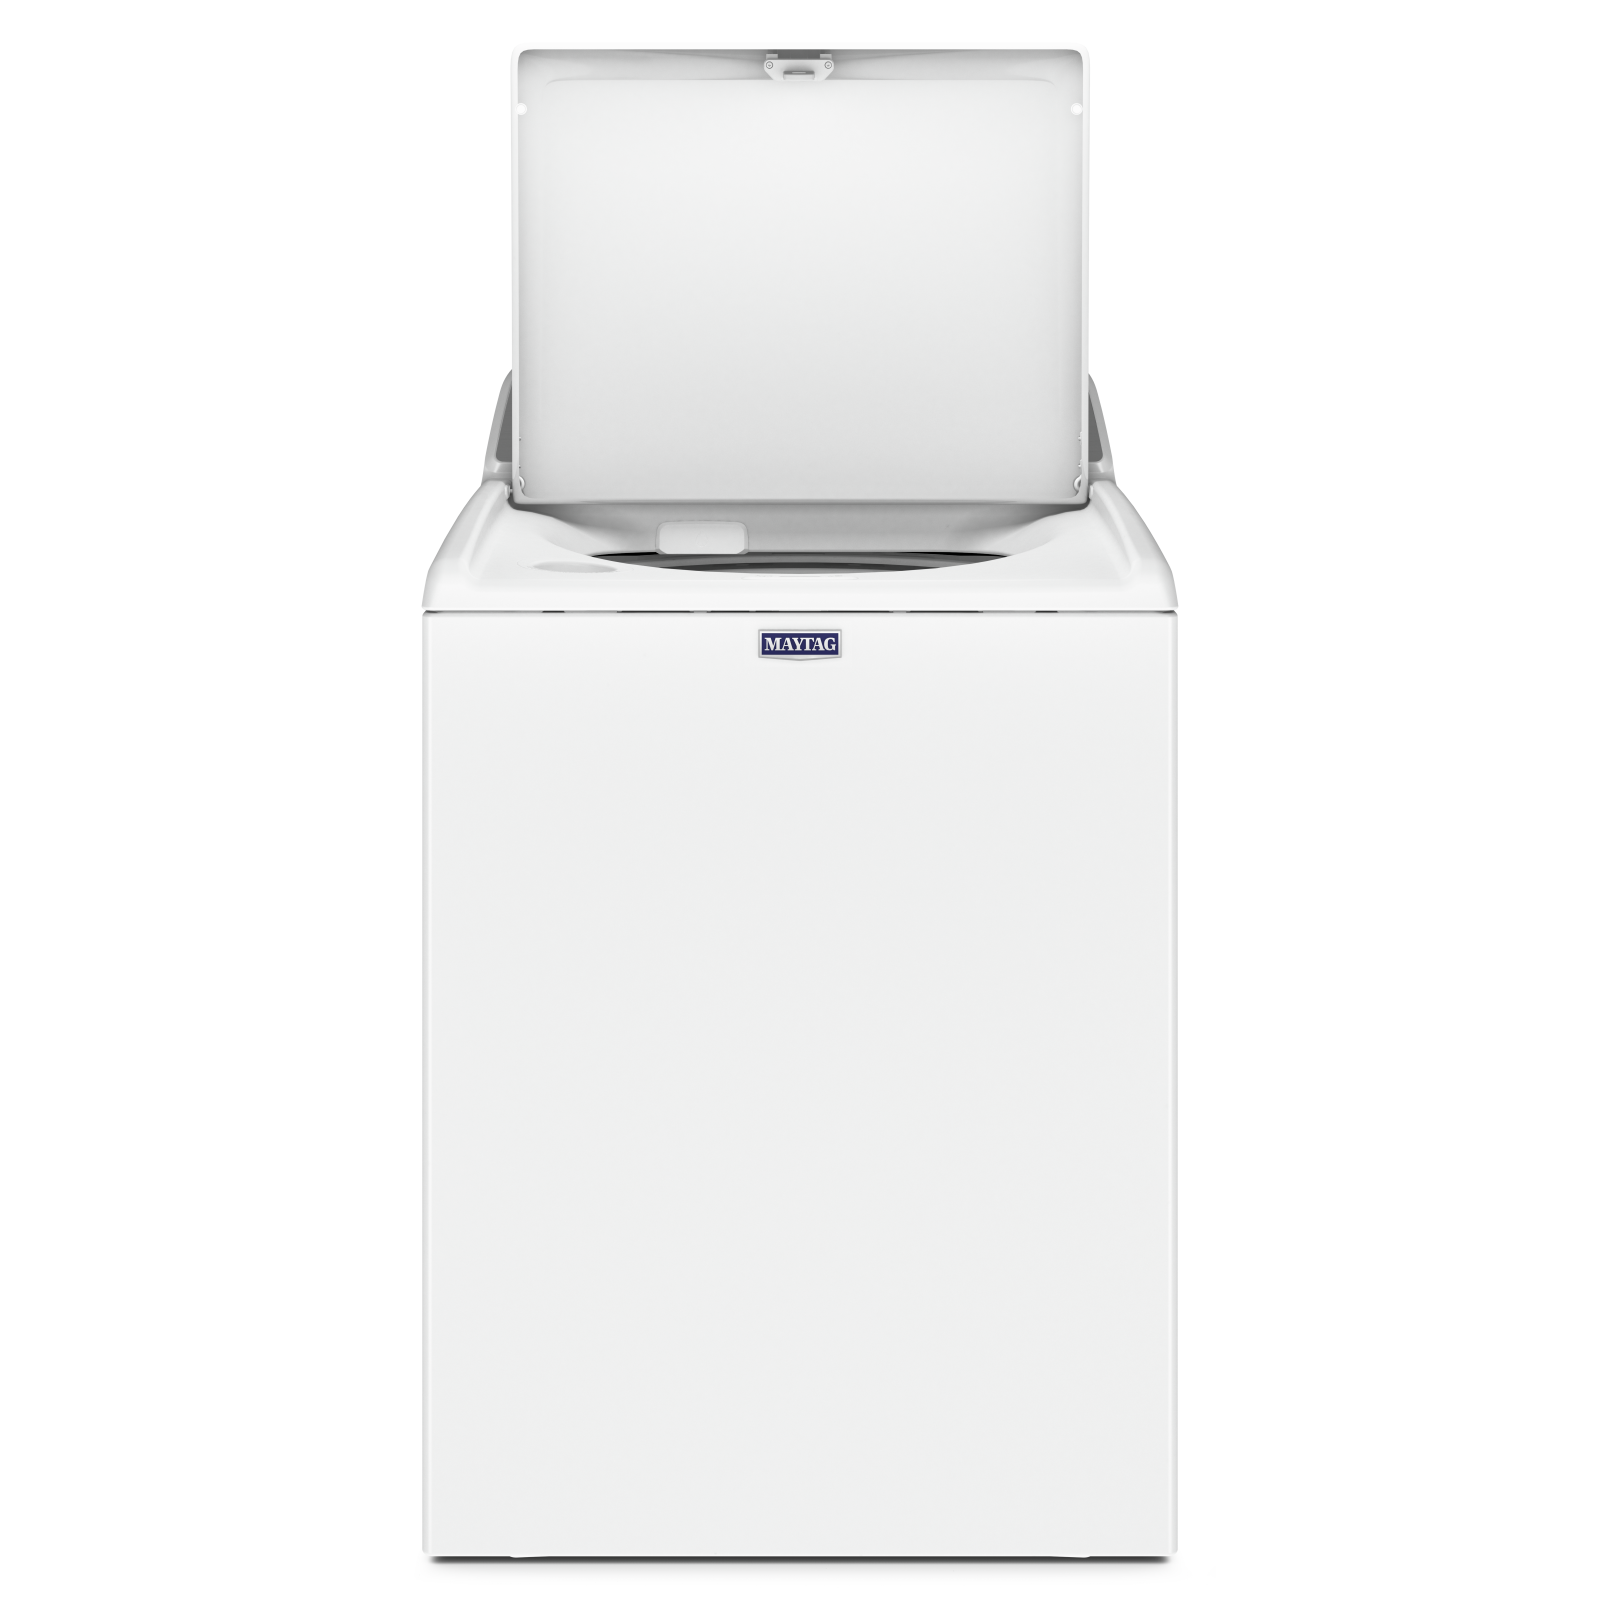 Maytag - 5.2 cu. Ft  Top Load Washer in White - MVW5035MW